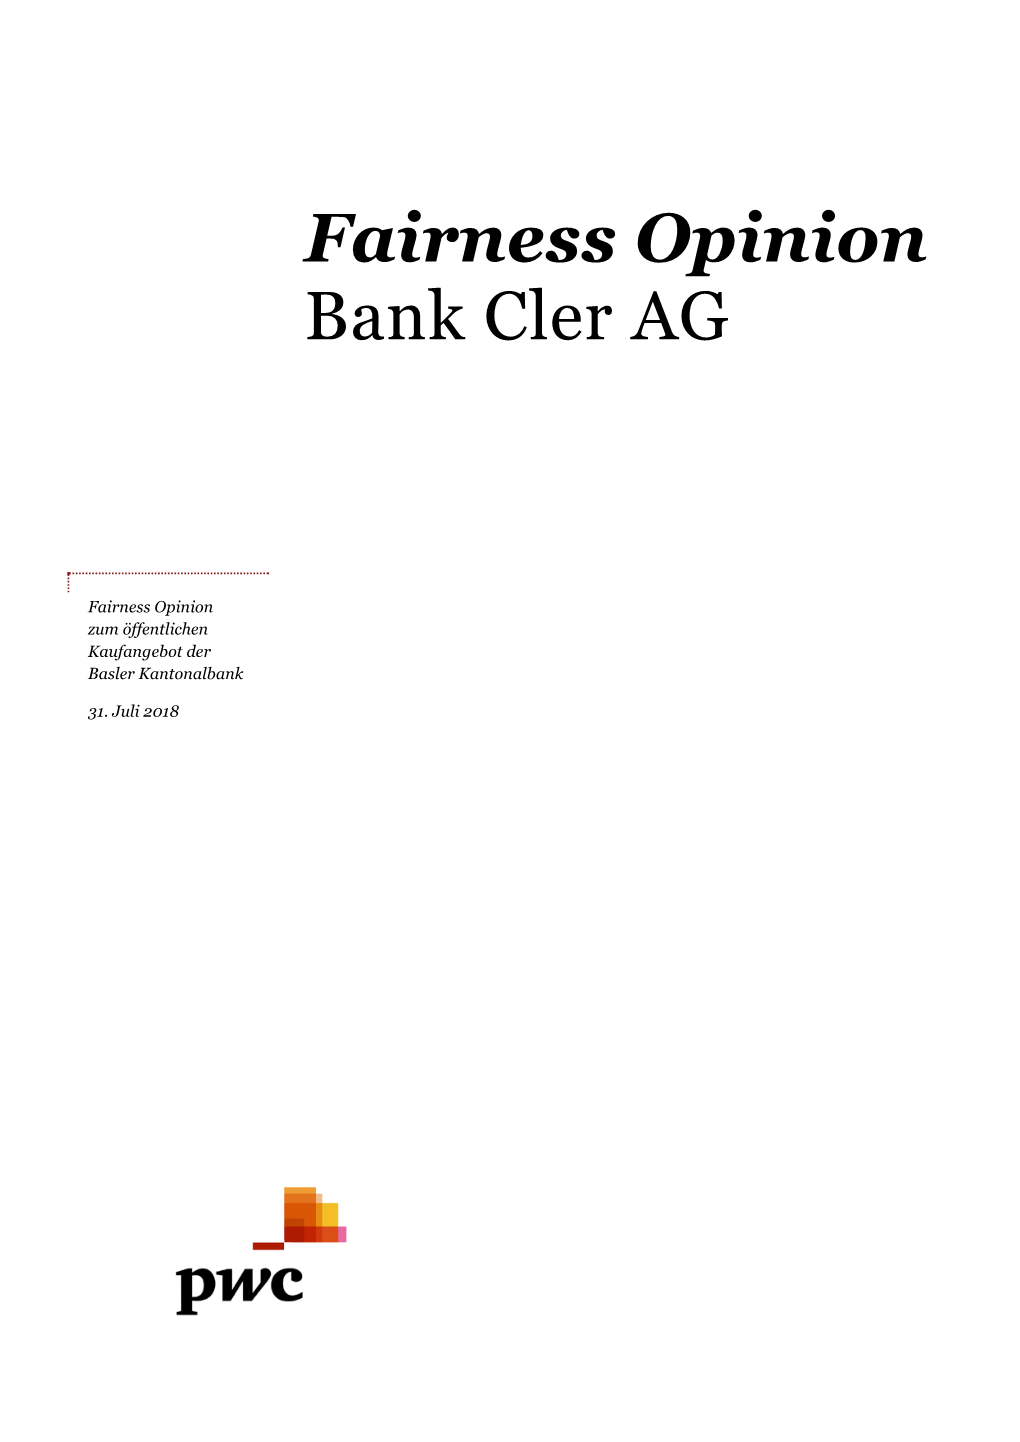 Fairness Opinion Bank Cler AG